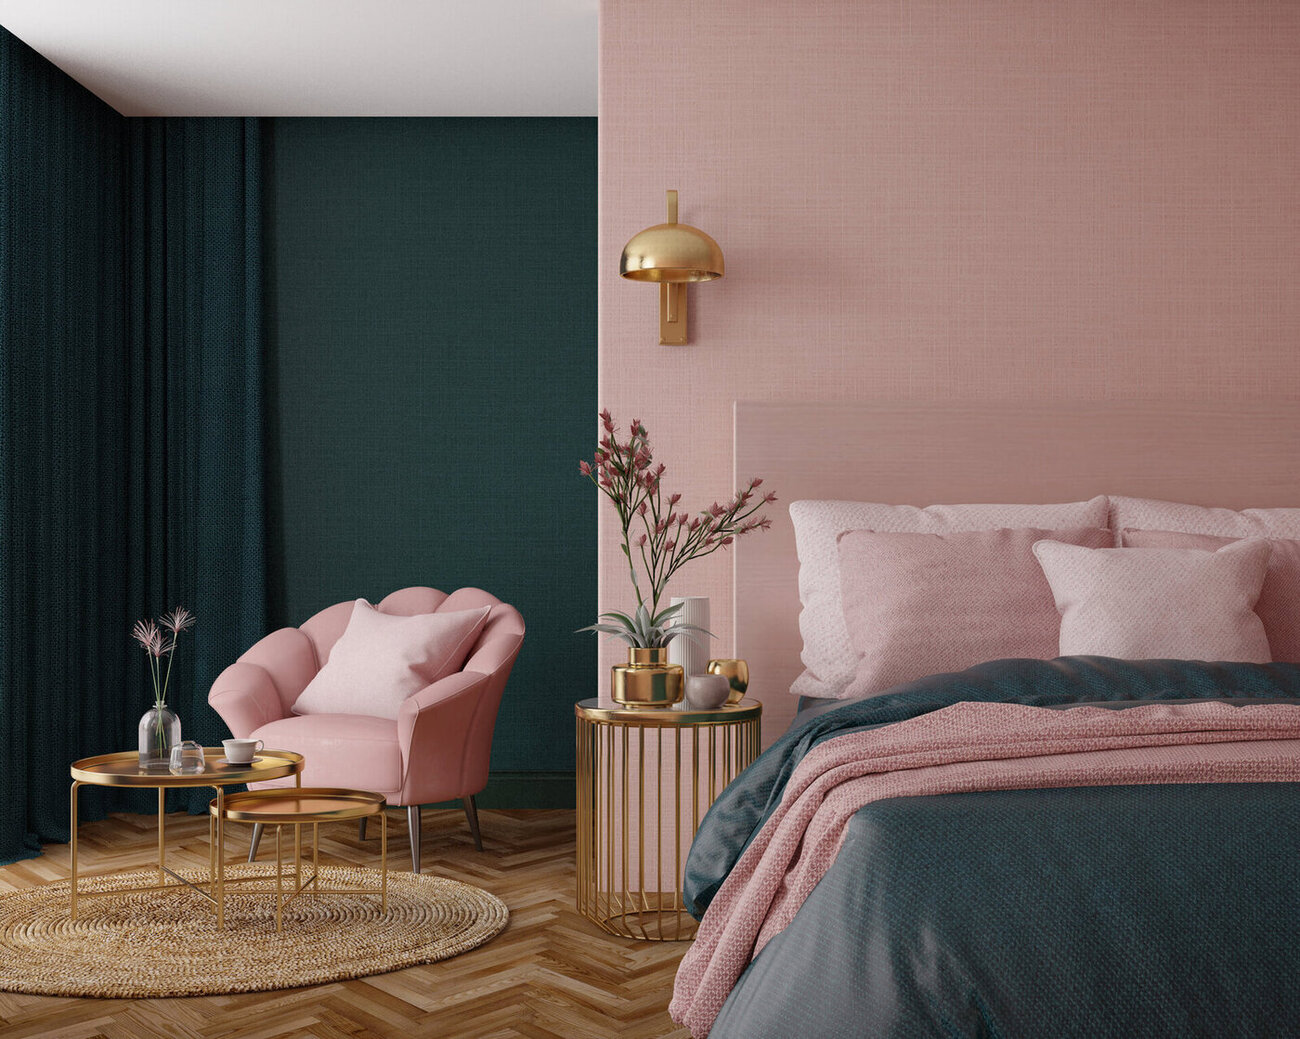 What Color Helps Sleep? Sleep Experts Agree This Shade Is Best